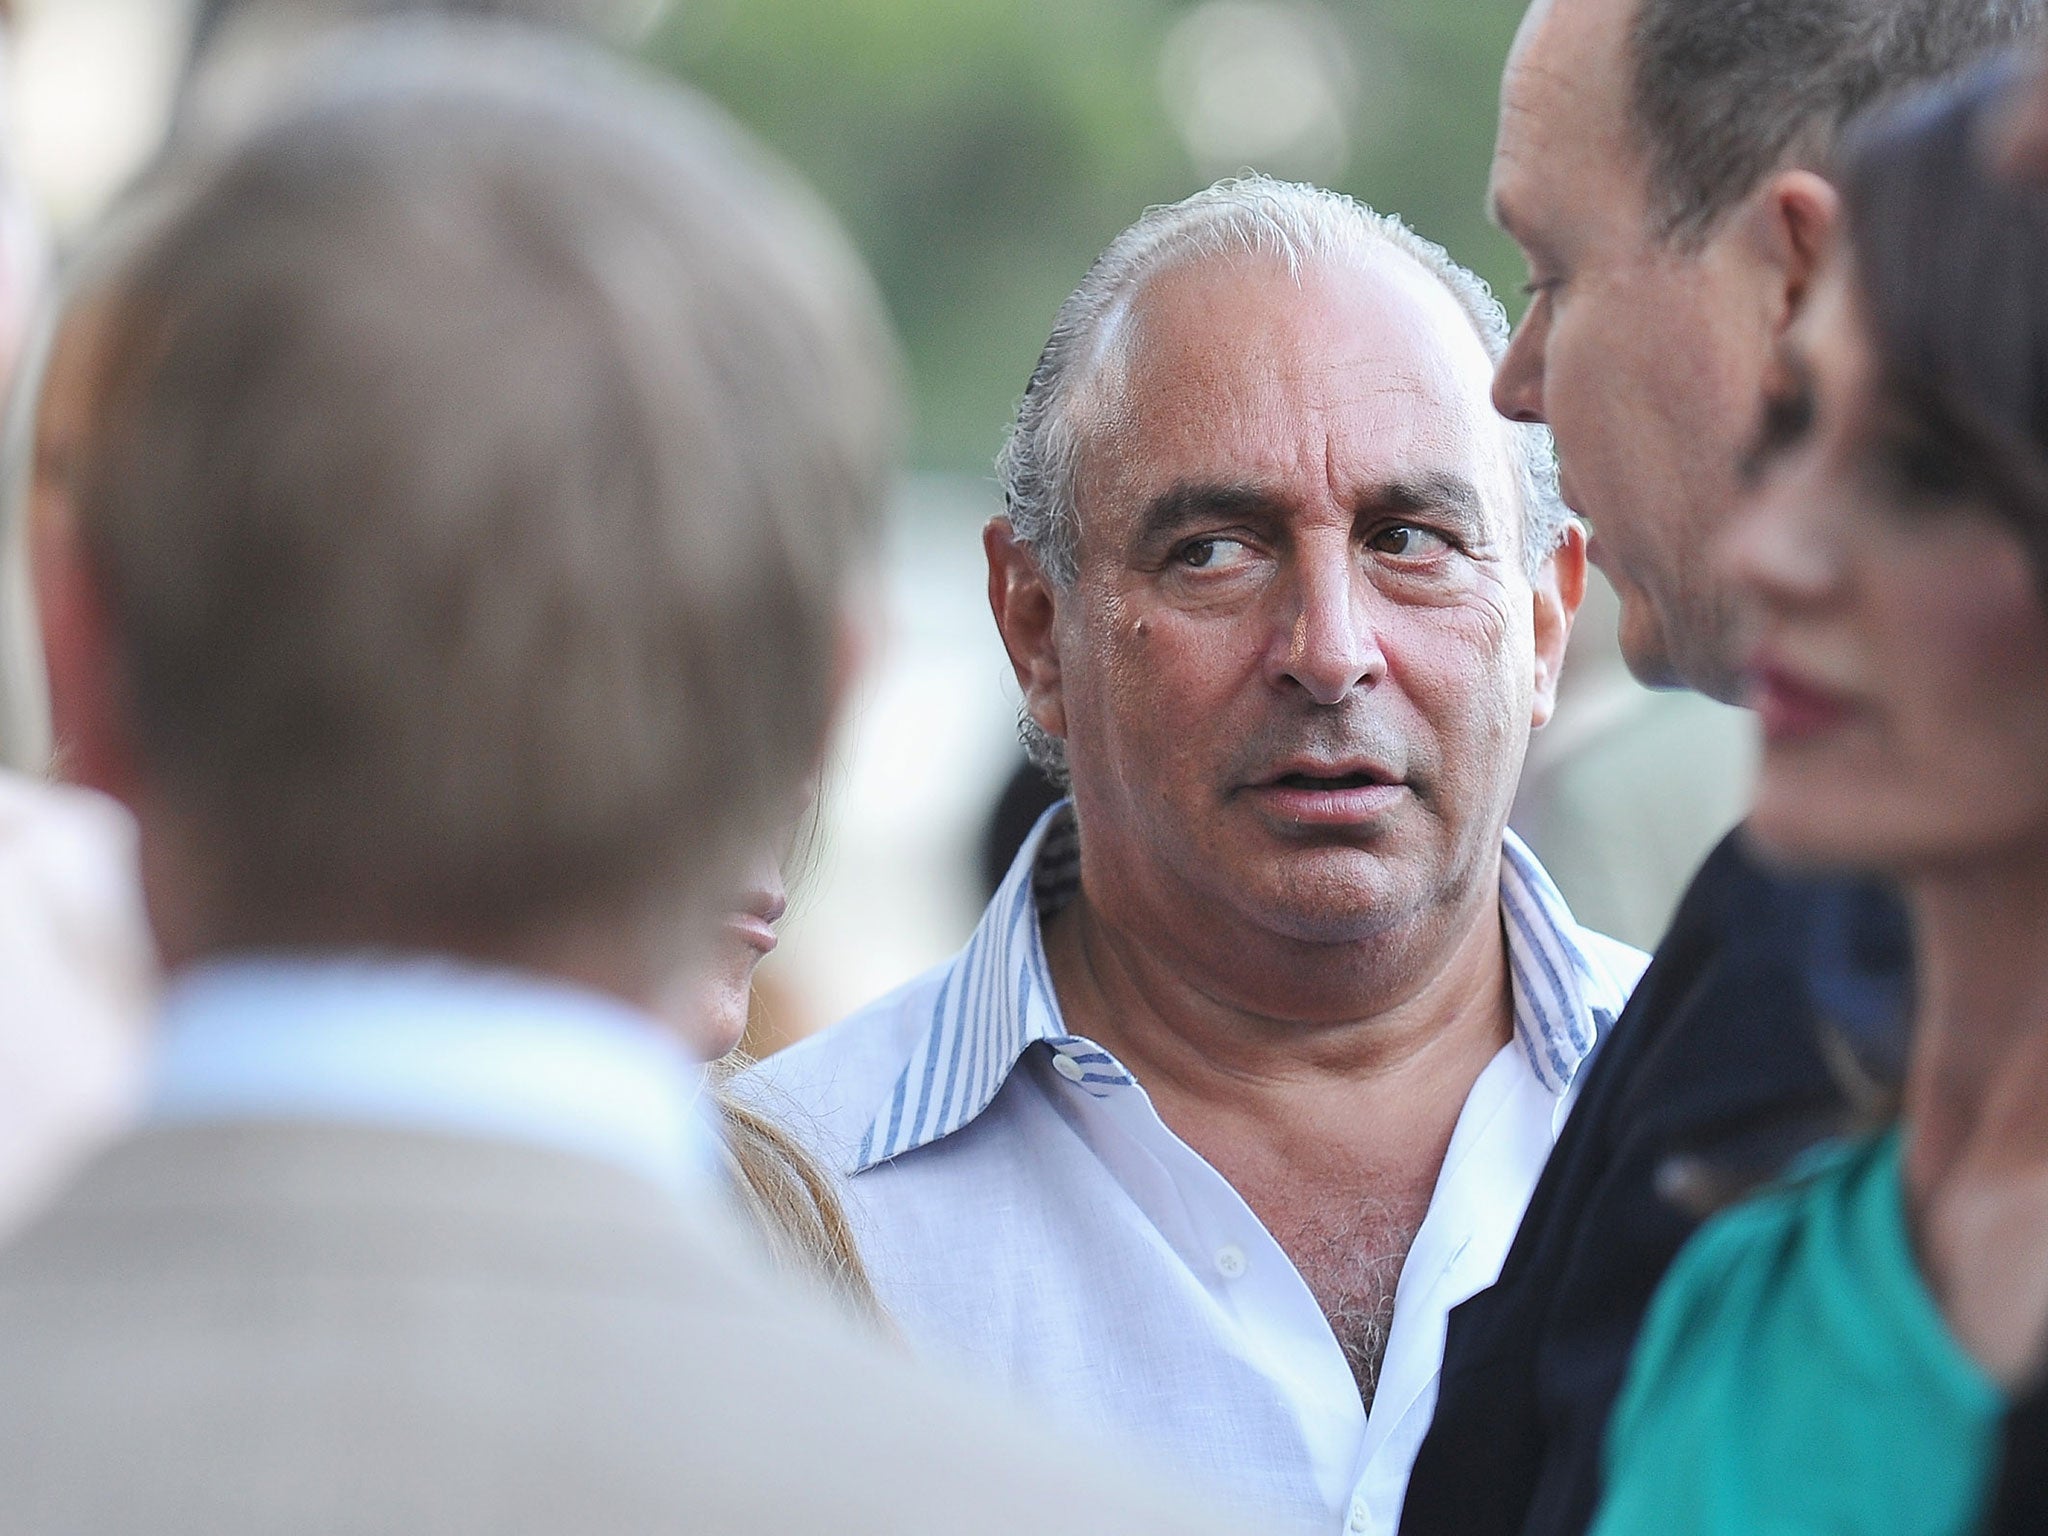 Sir Philip Green. BHS pension scandal now sorted?